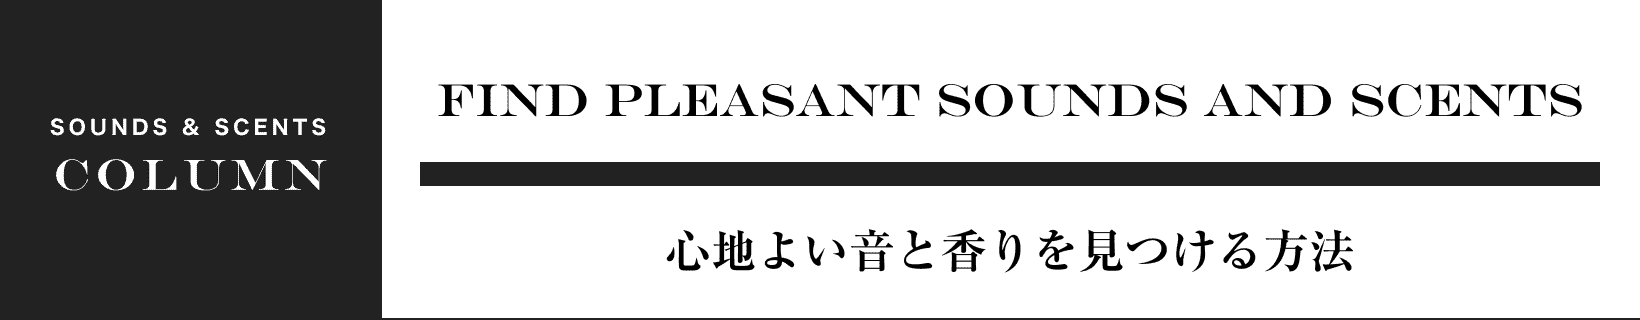 FIND PLEASANT SOUNDS AND SCENTS 心地よい音と香りを見つける方法